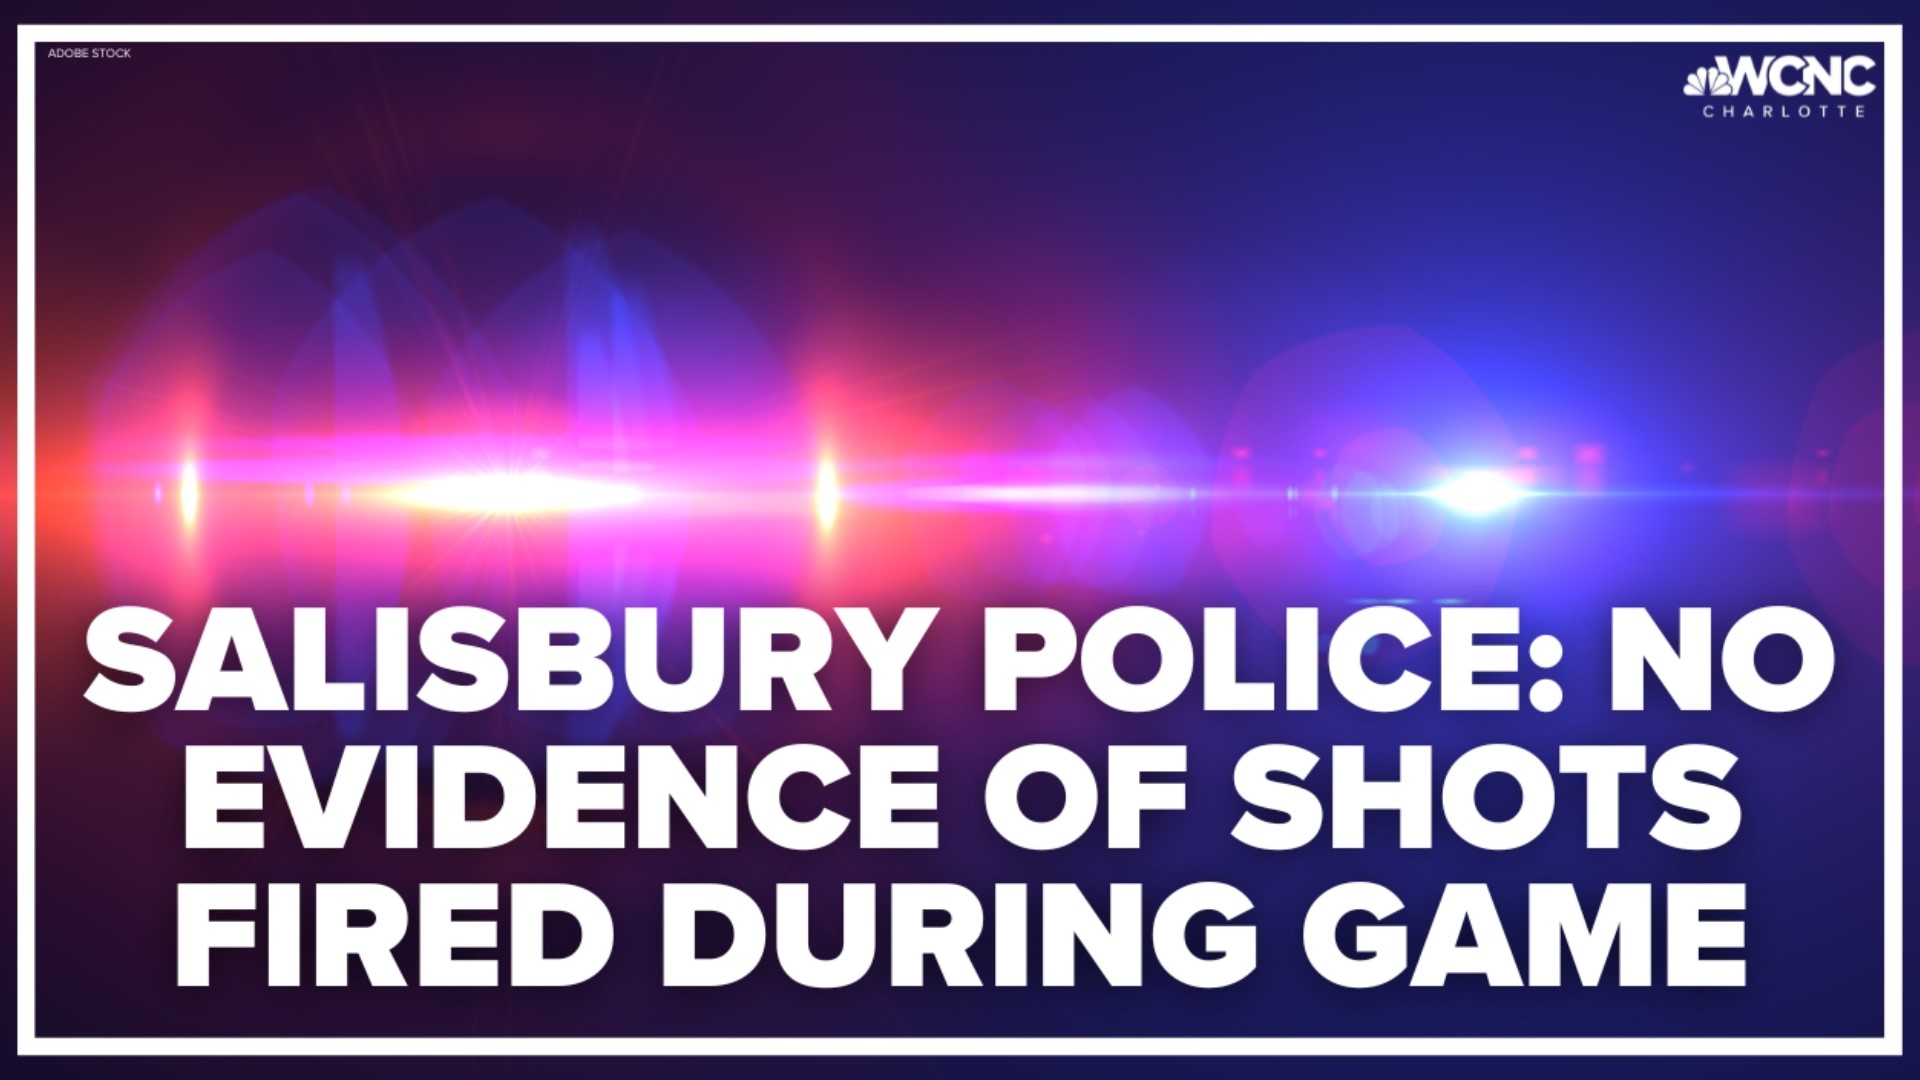 Salisbury Police were unable to find any evidence of gunshots or guns.